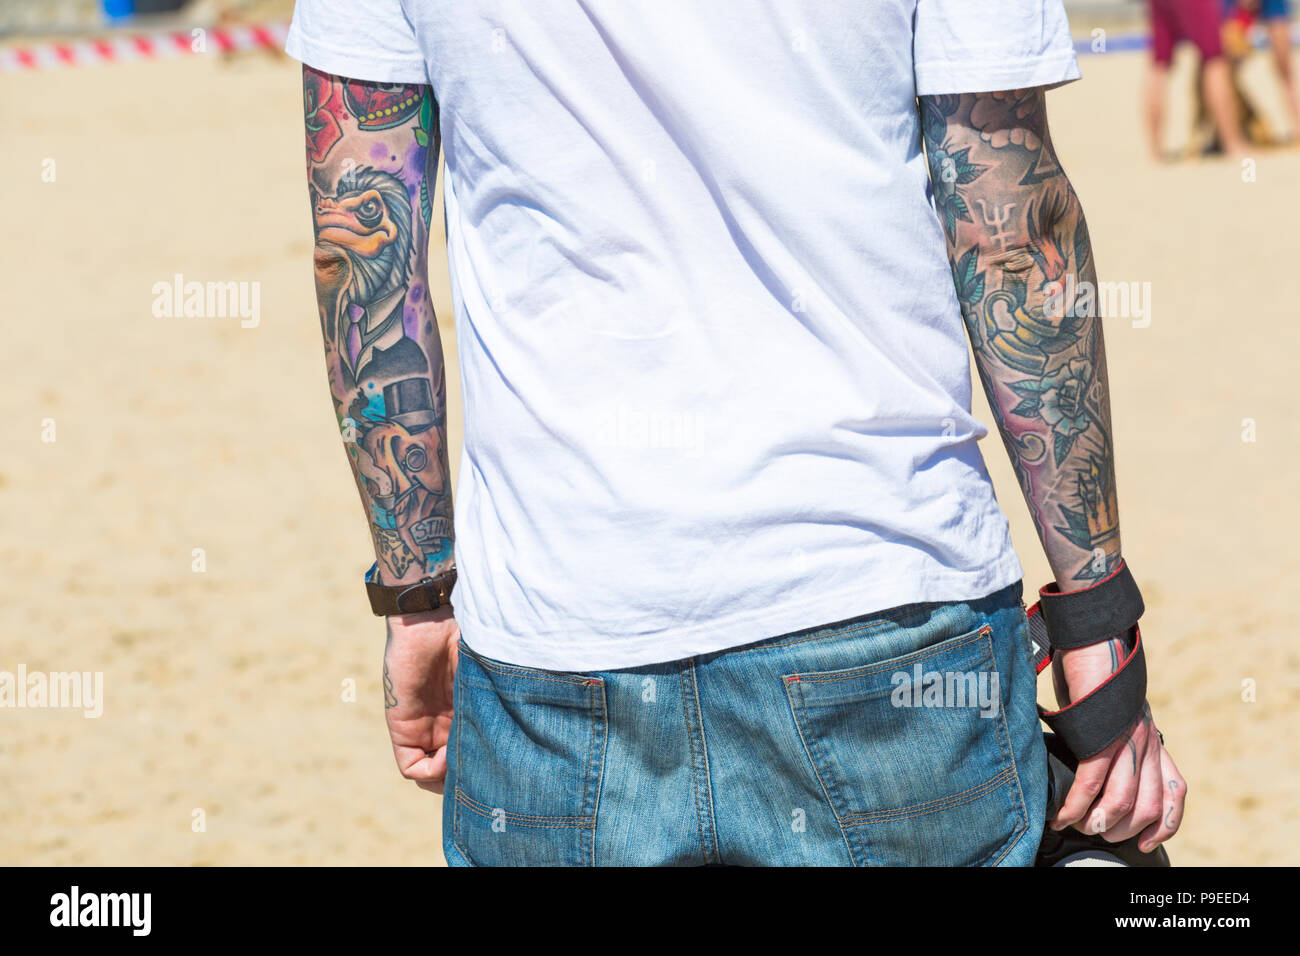 Man with tattoos on arm at the beach at Branksome Dene, Poole, Dorset UK in July Stock Photo